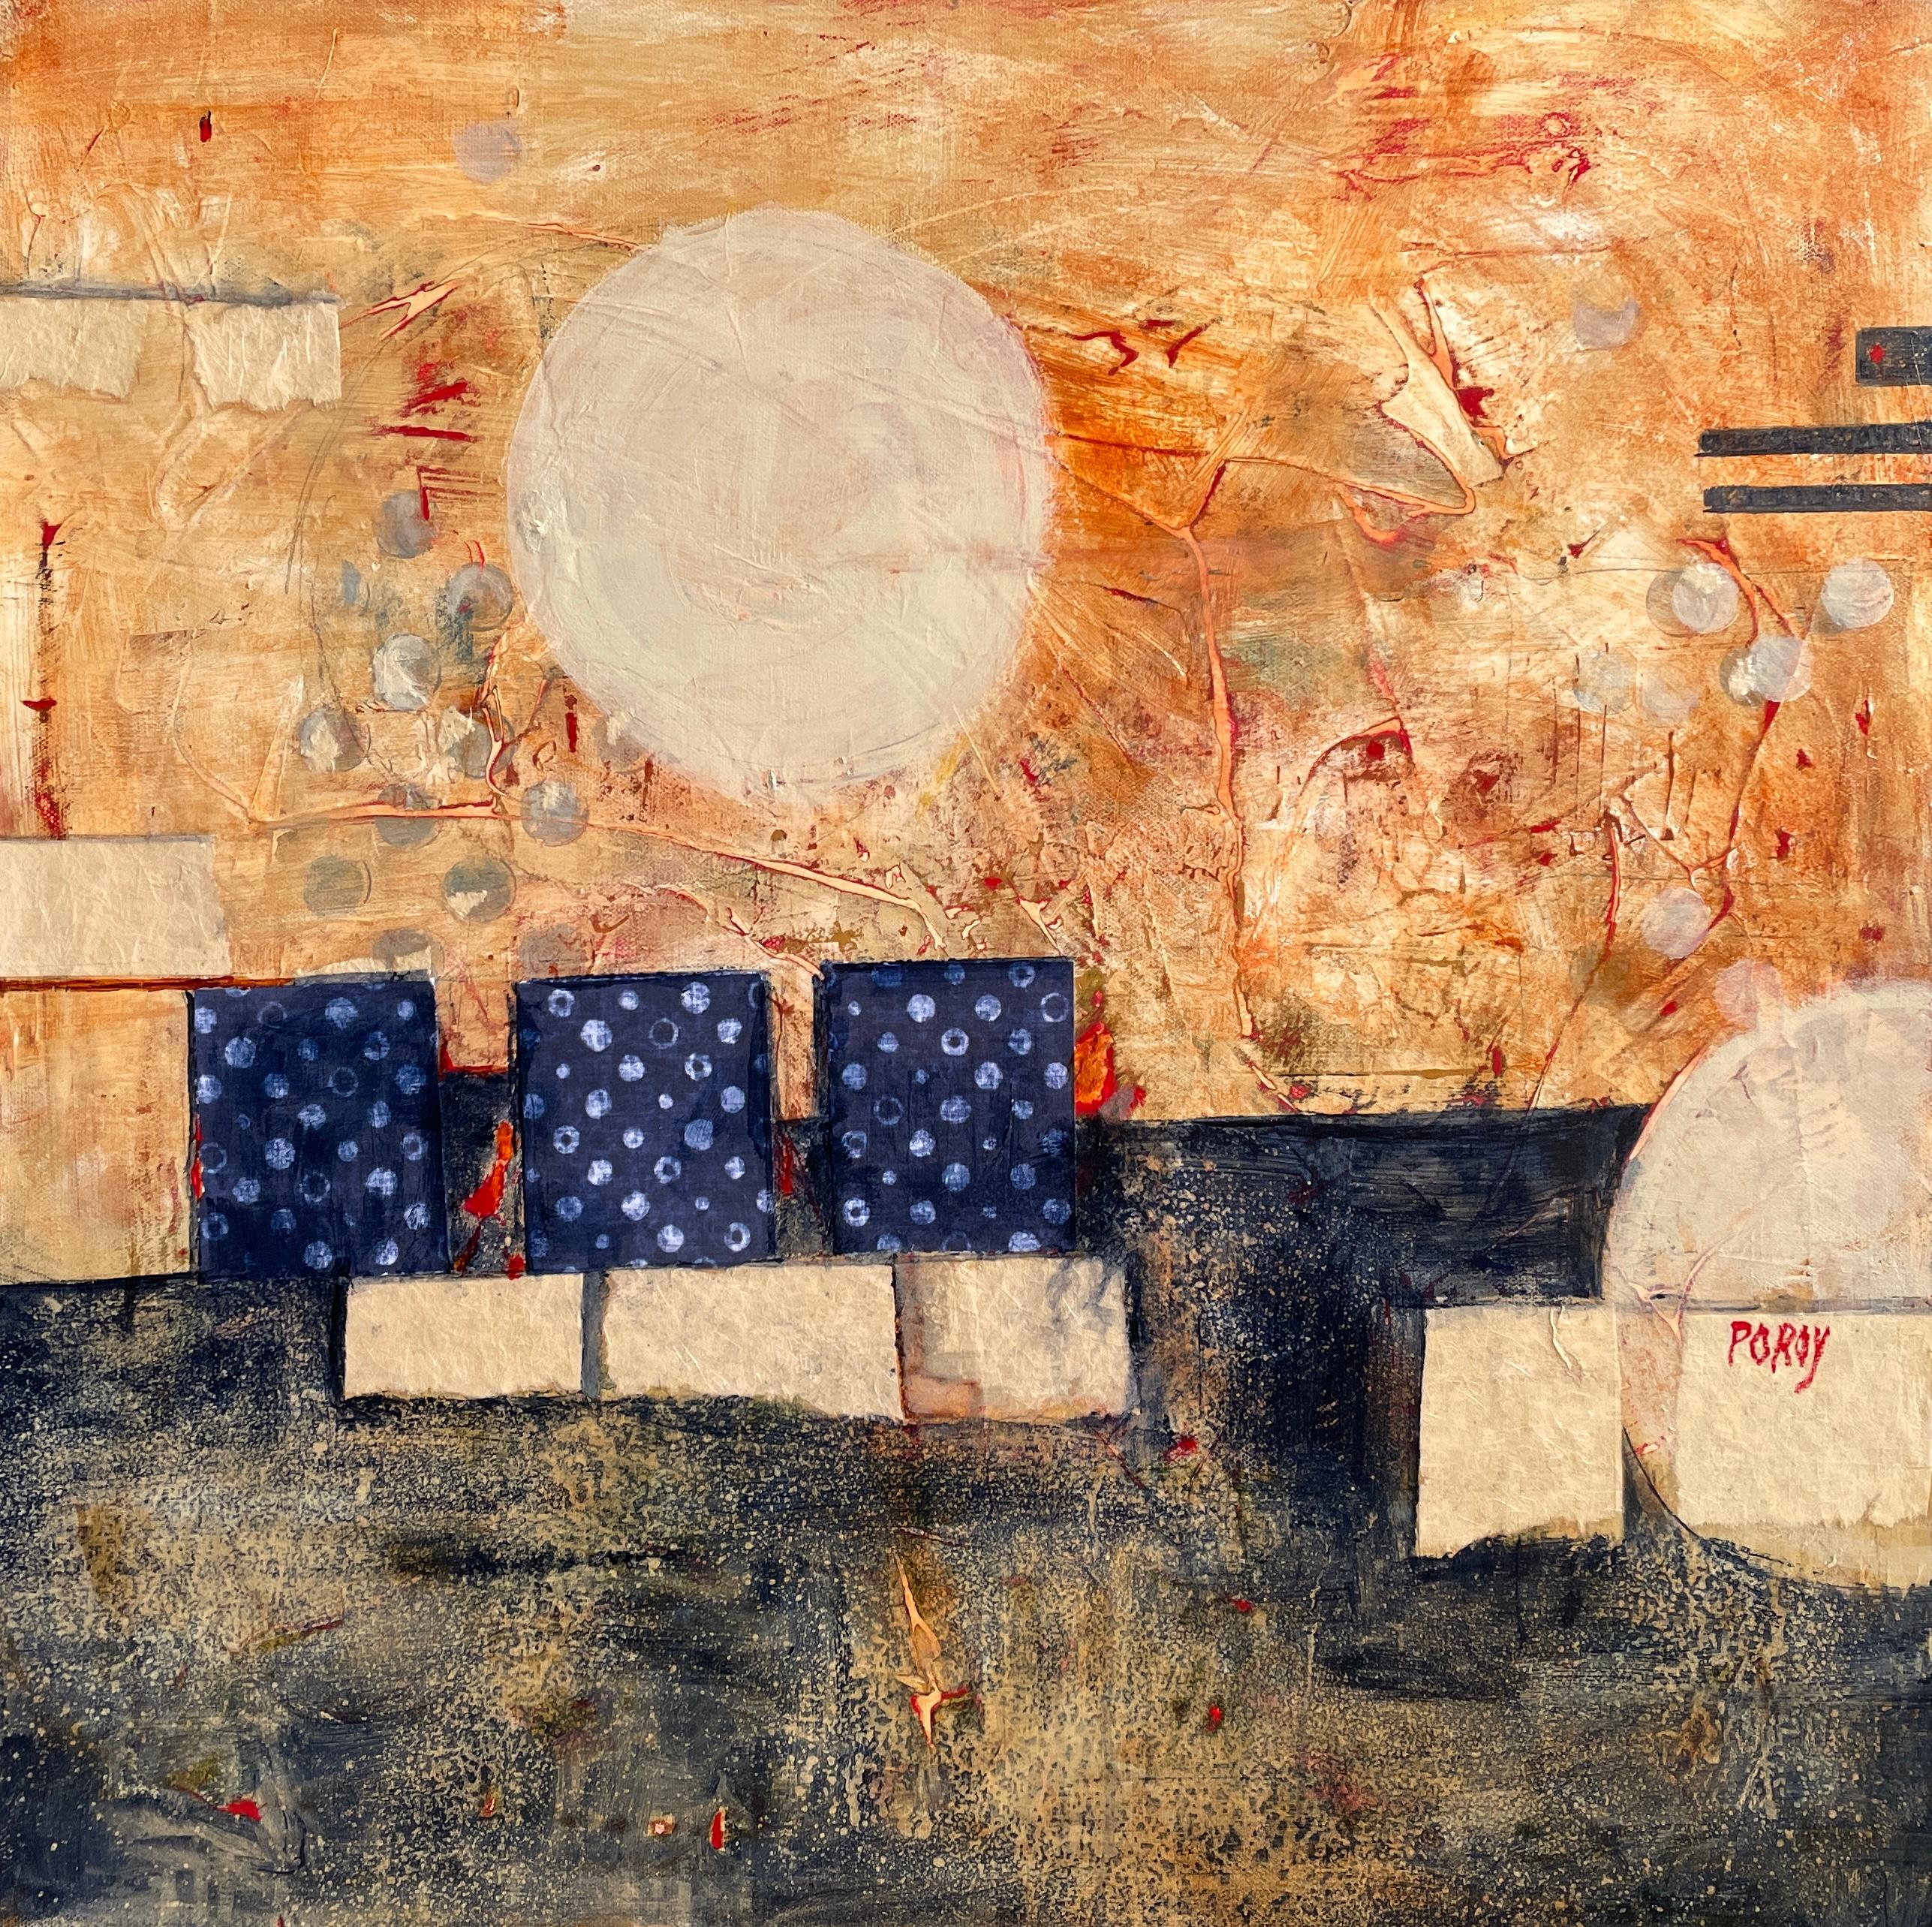 Maria Poroy's "Moonrise" is a 24" x 24" mixed media canvas that exemplifies contemporary abstract expressionism. The artwork features a warm, earthy palette, where burnt oranges and muted umbers form a textured backdrop, reminiscent of a celestial